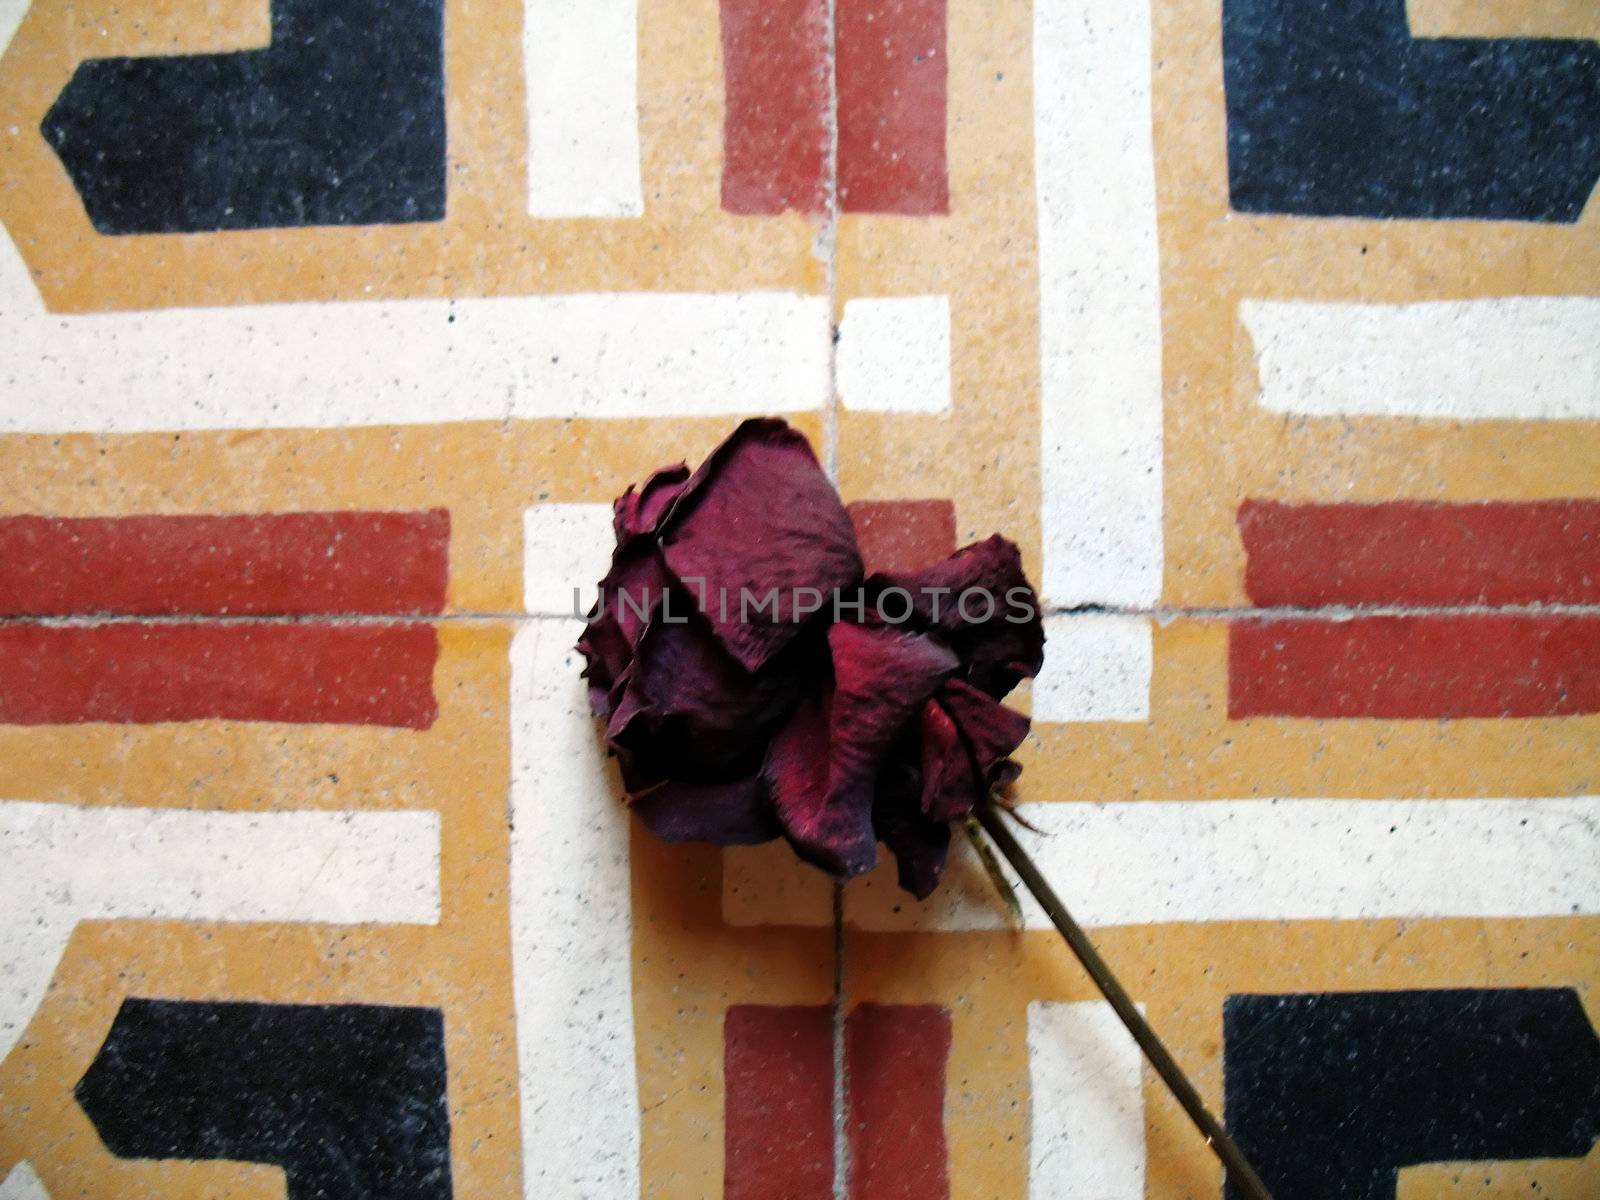 rose on old floor by rmarinello